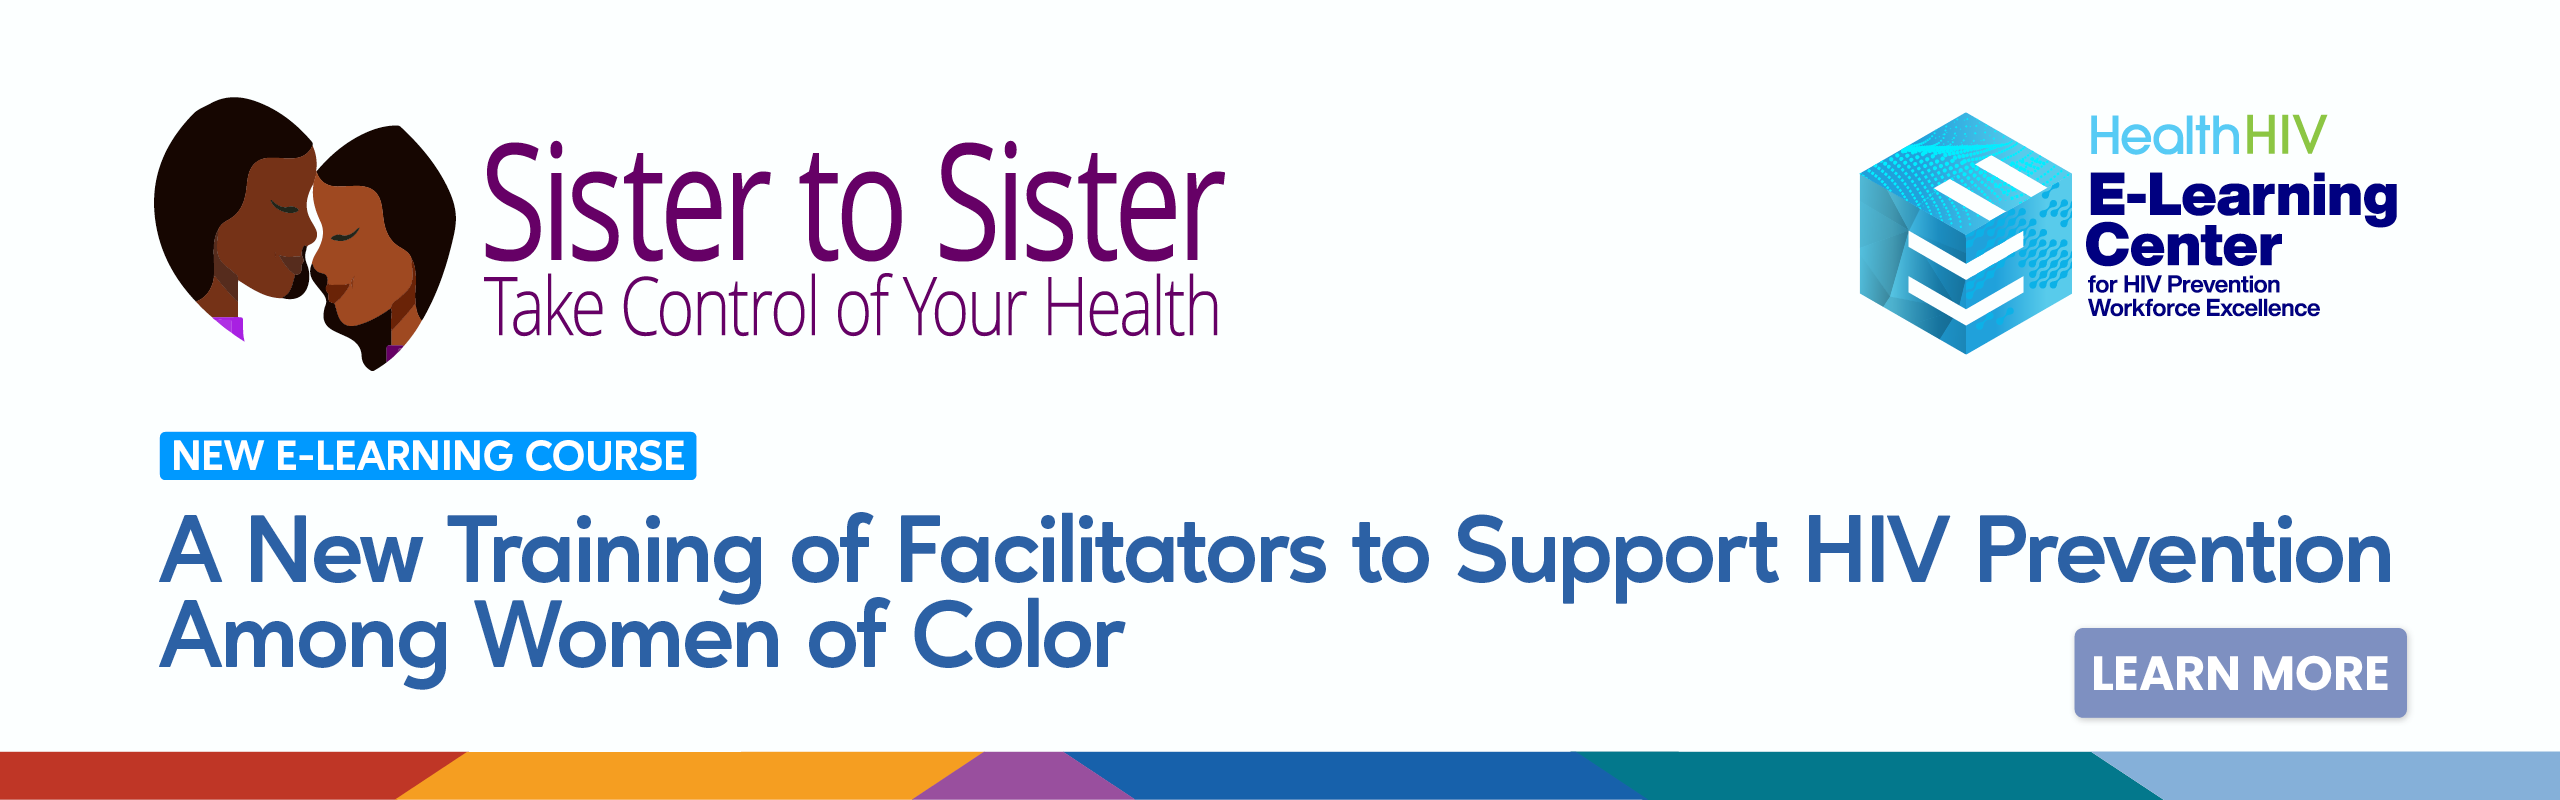 Sister to Sister: Take Control of Your Health